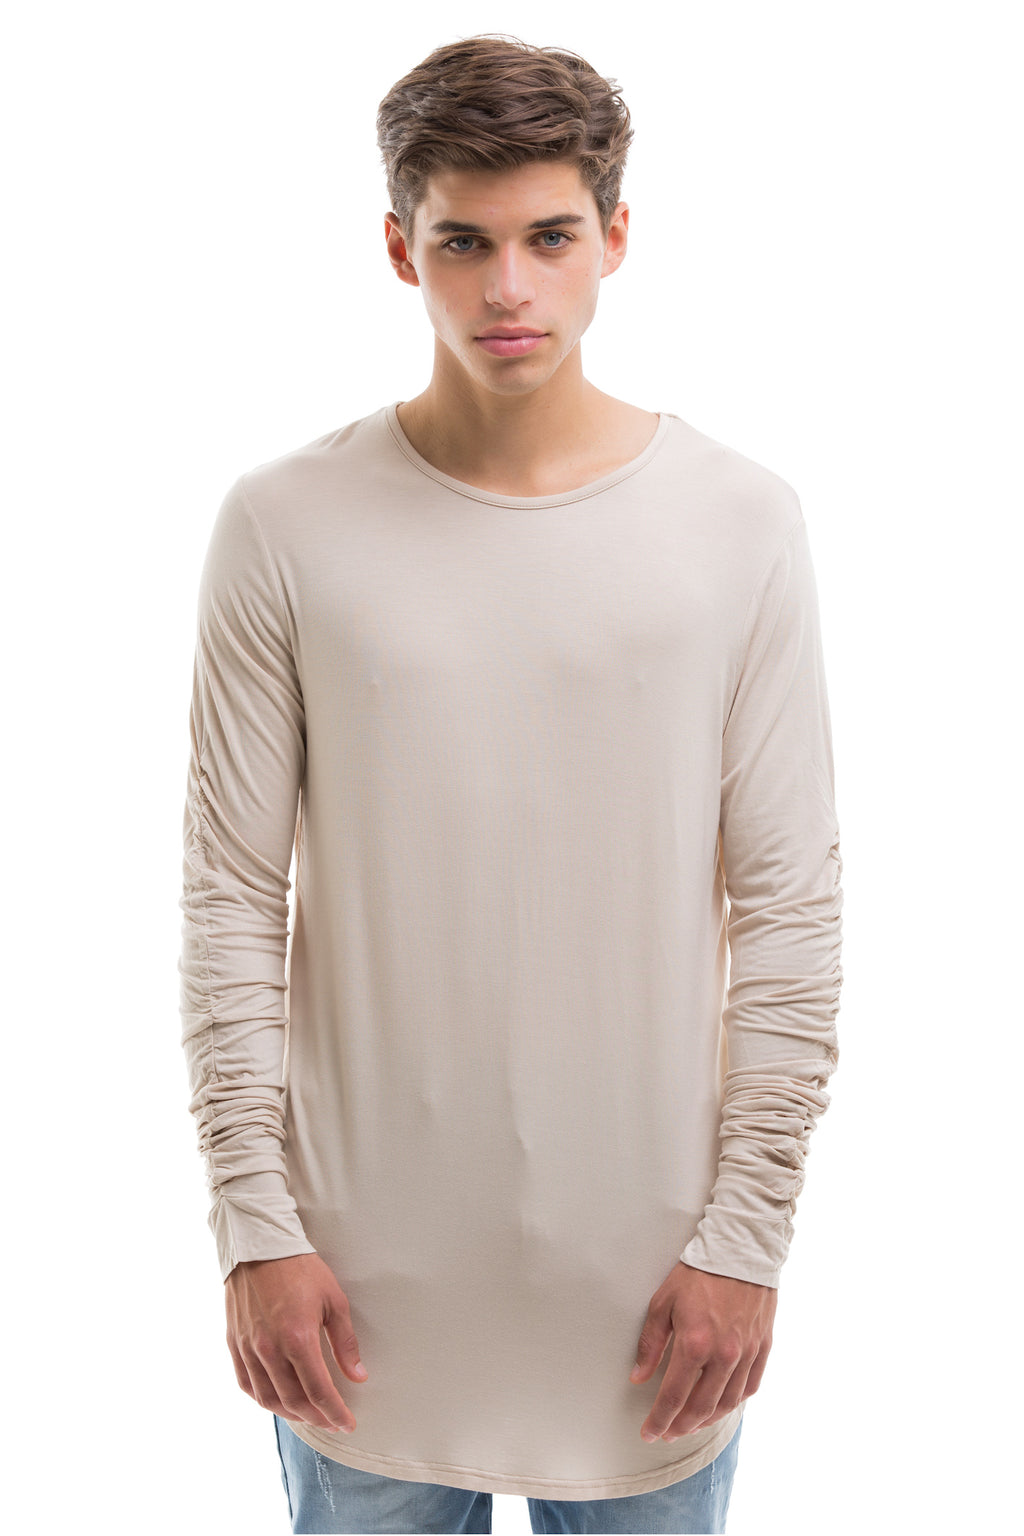 Beige Scoop Cut Long Sleeve T Shirt With Double Cuffed Sleeve Ends - Front View